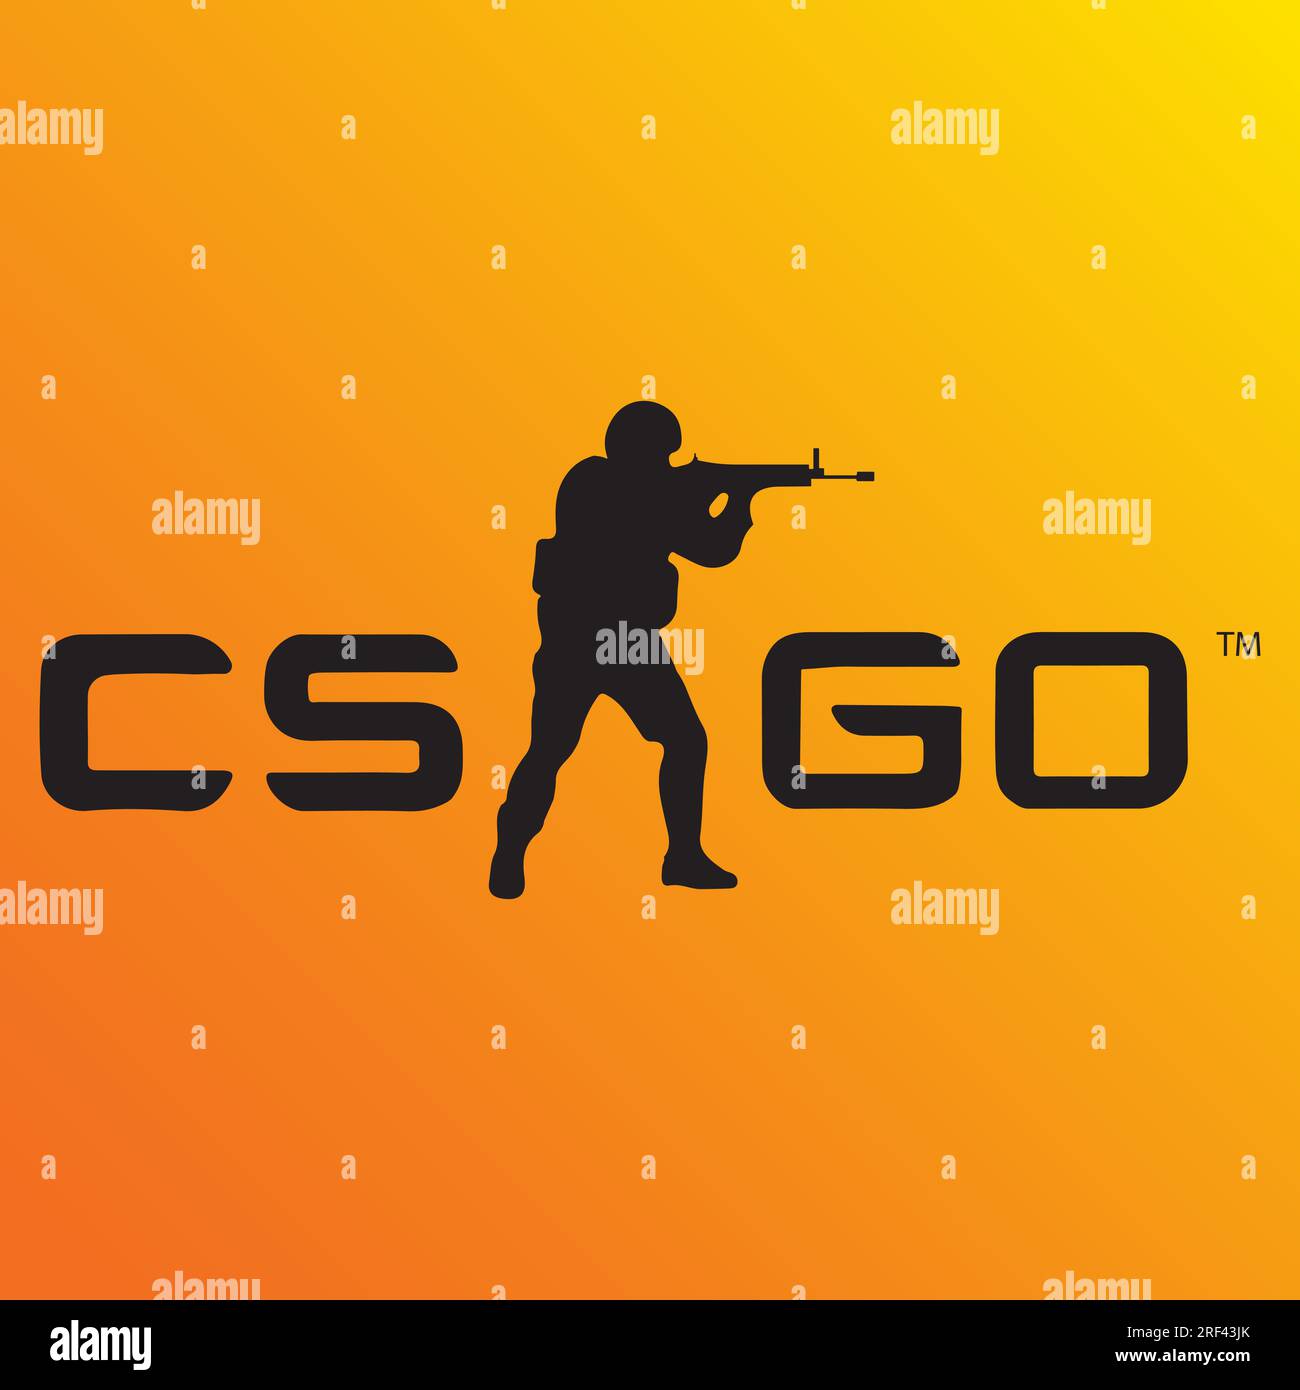 45 Clan Logos For Your Counter-Strike: Global Offensive Team